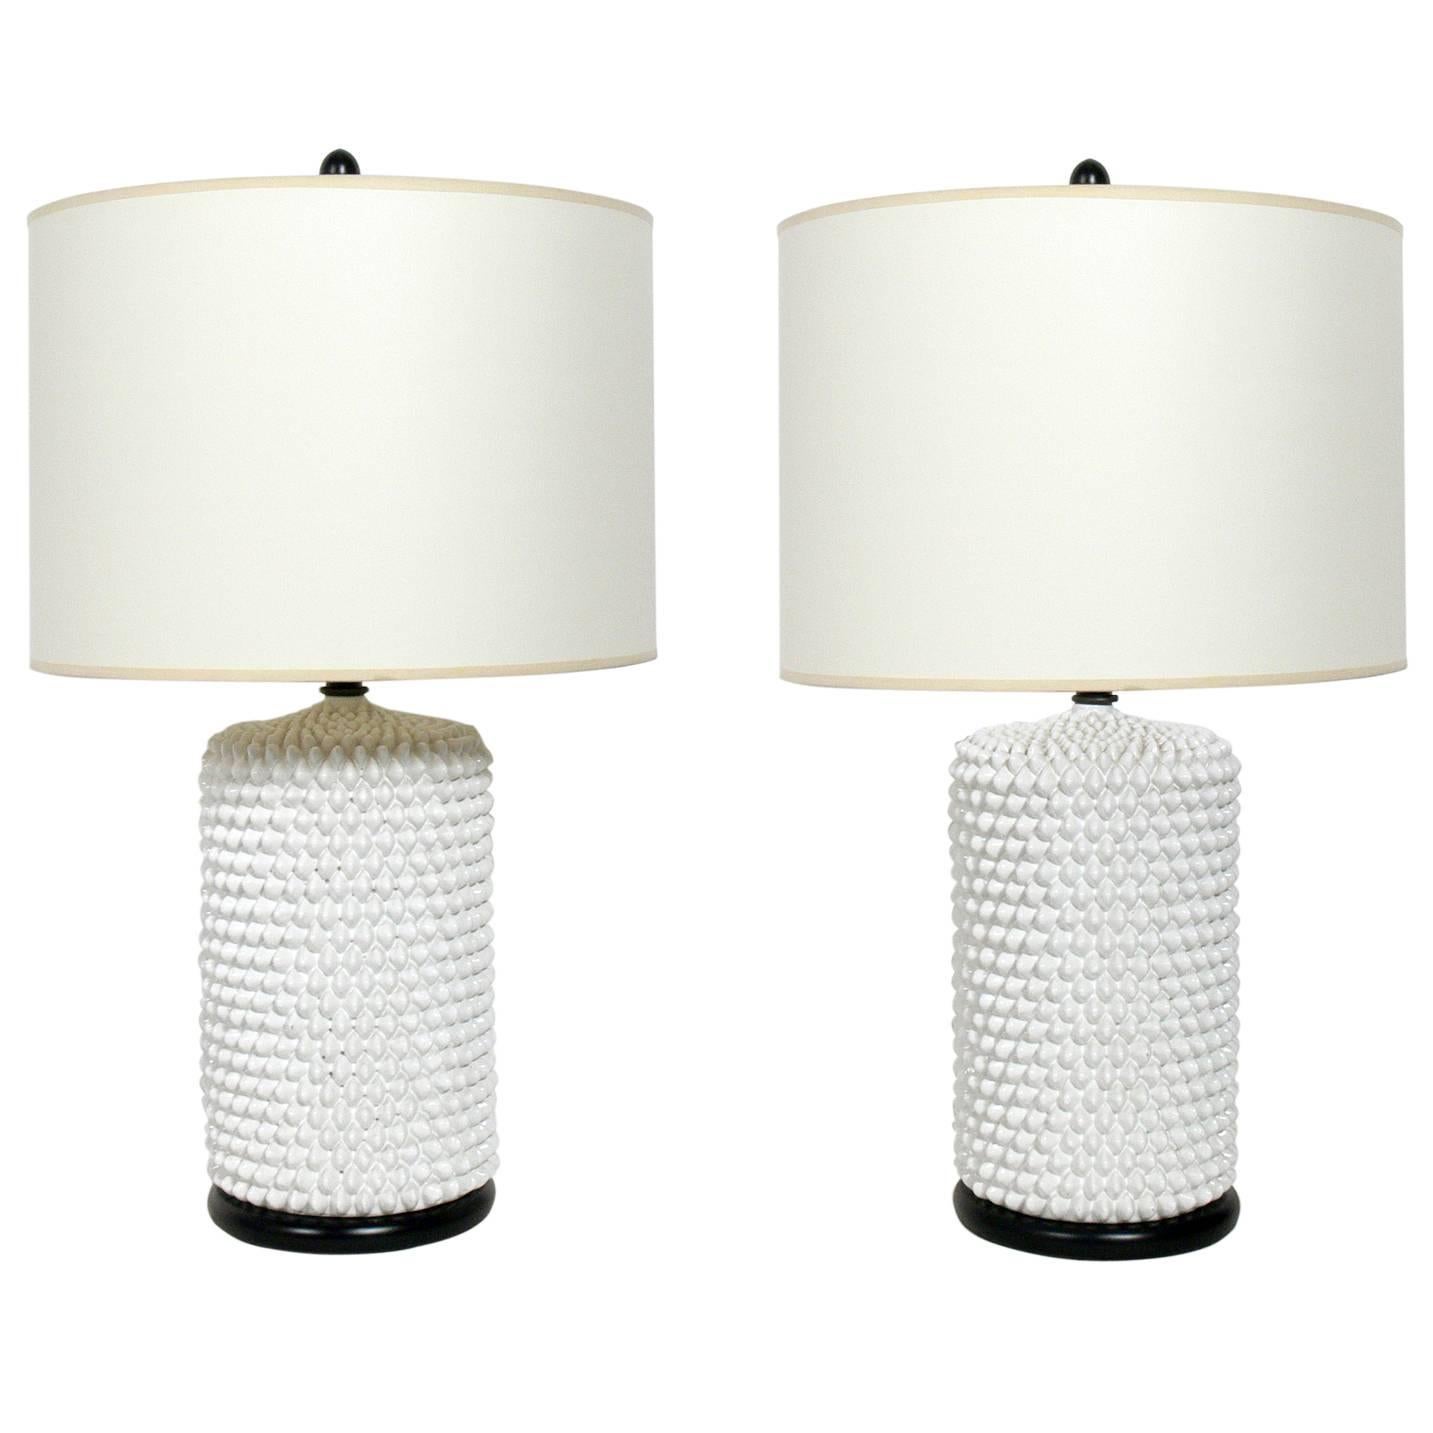 Pair of White Ceramic Studded Lamps